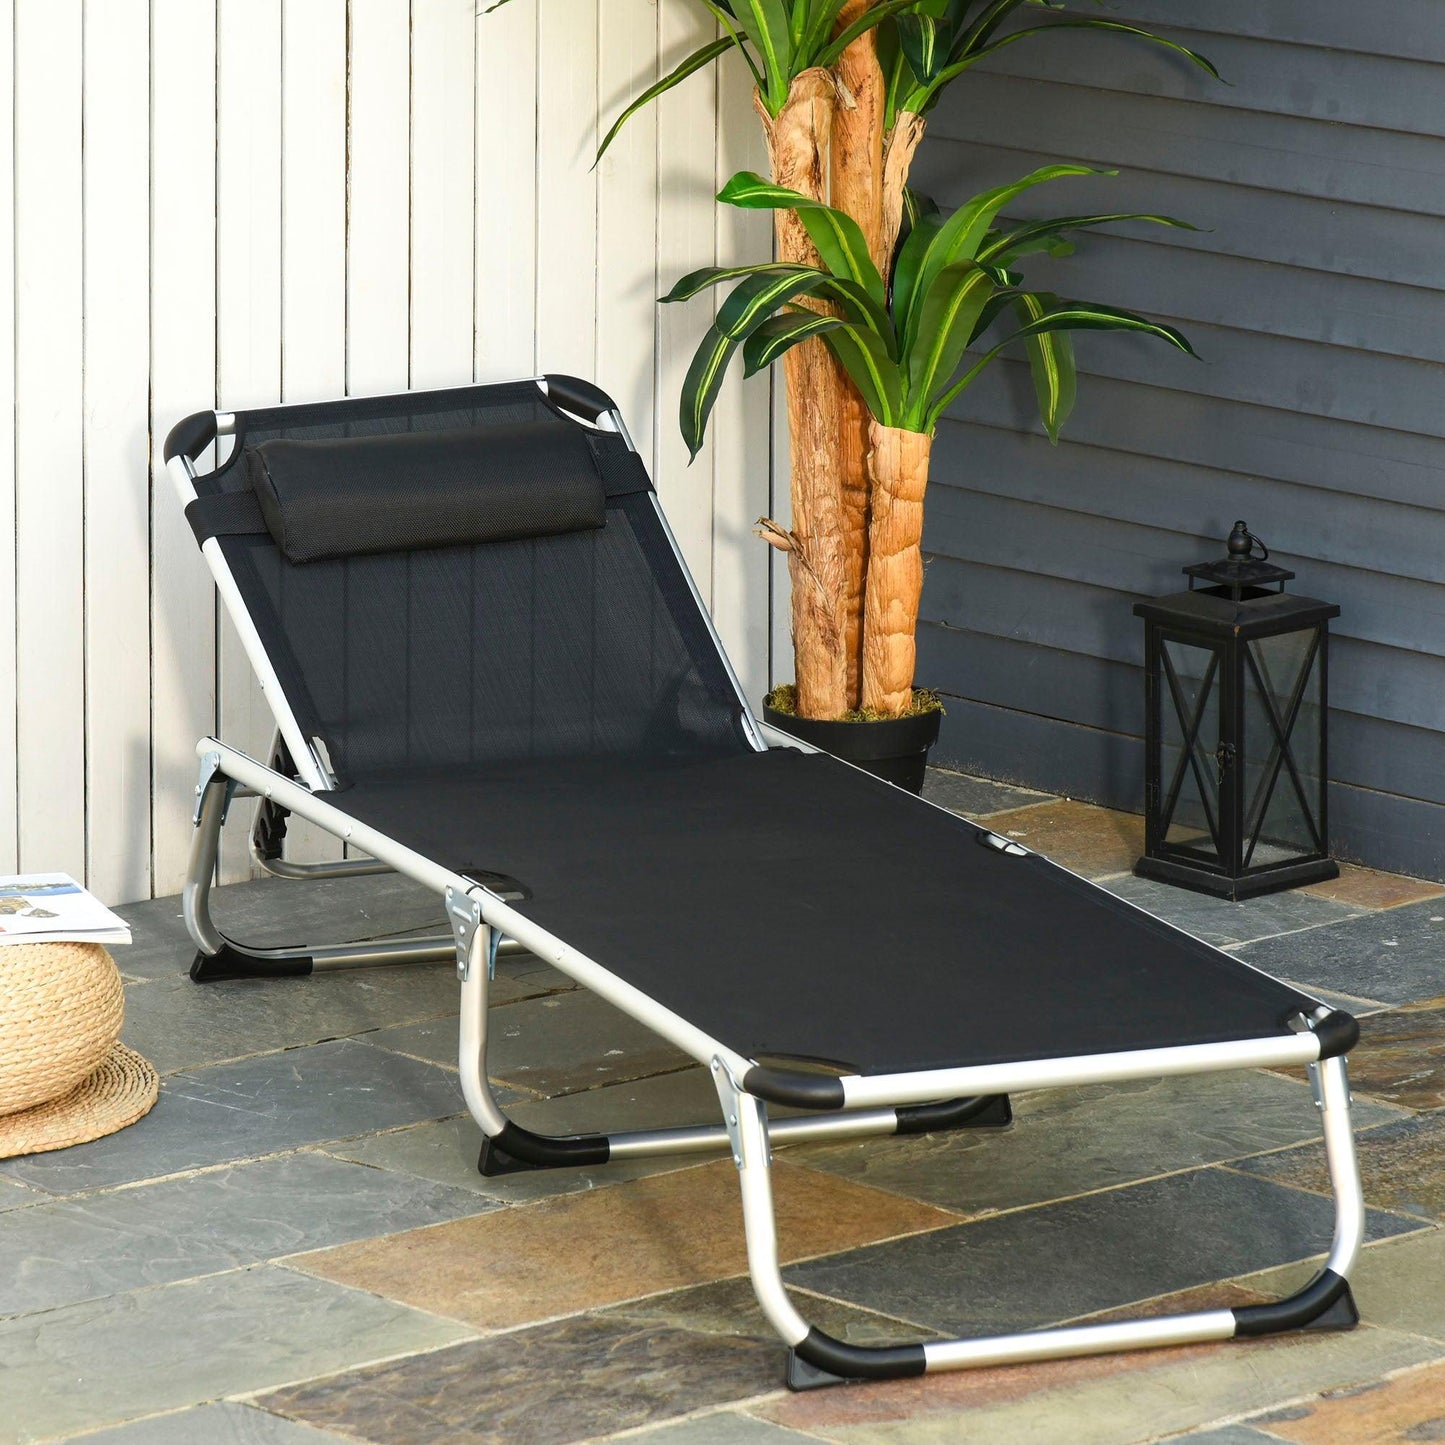 Outsunny Foldable Reclining Sun Lounger with Pillow, Black - ALL4U RETAILER LTD